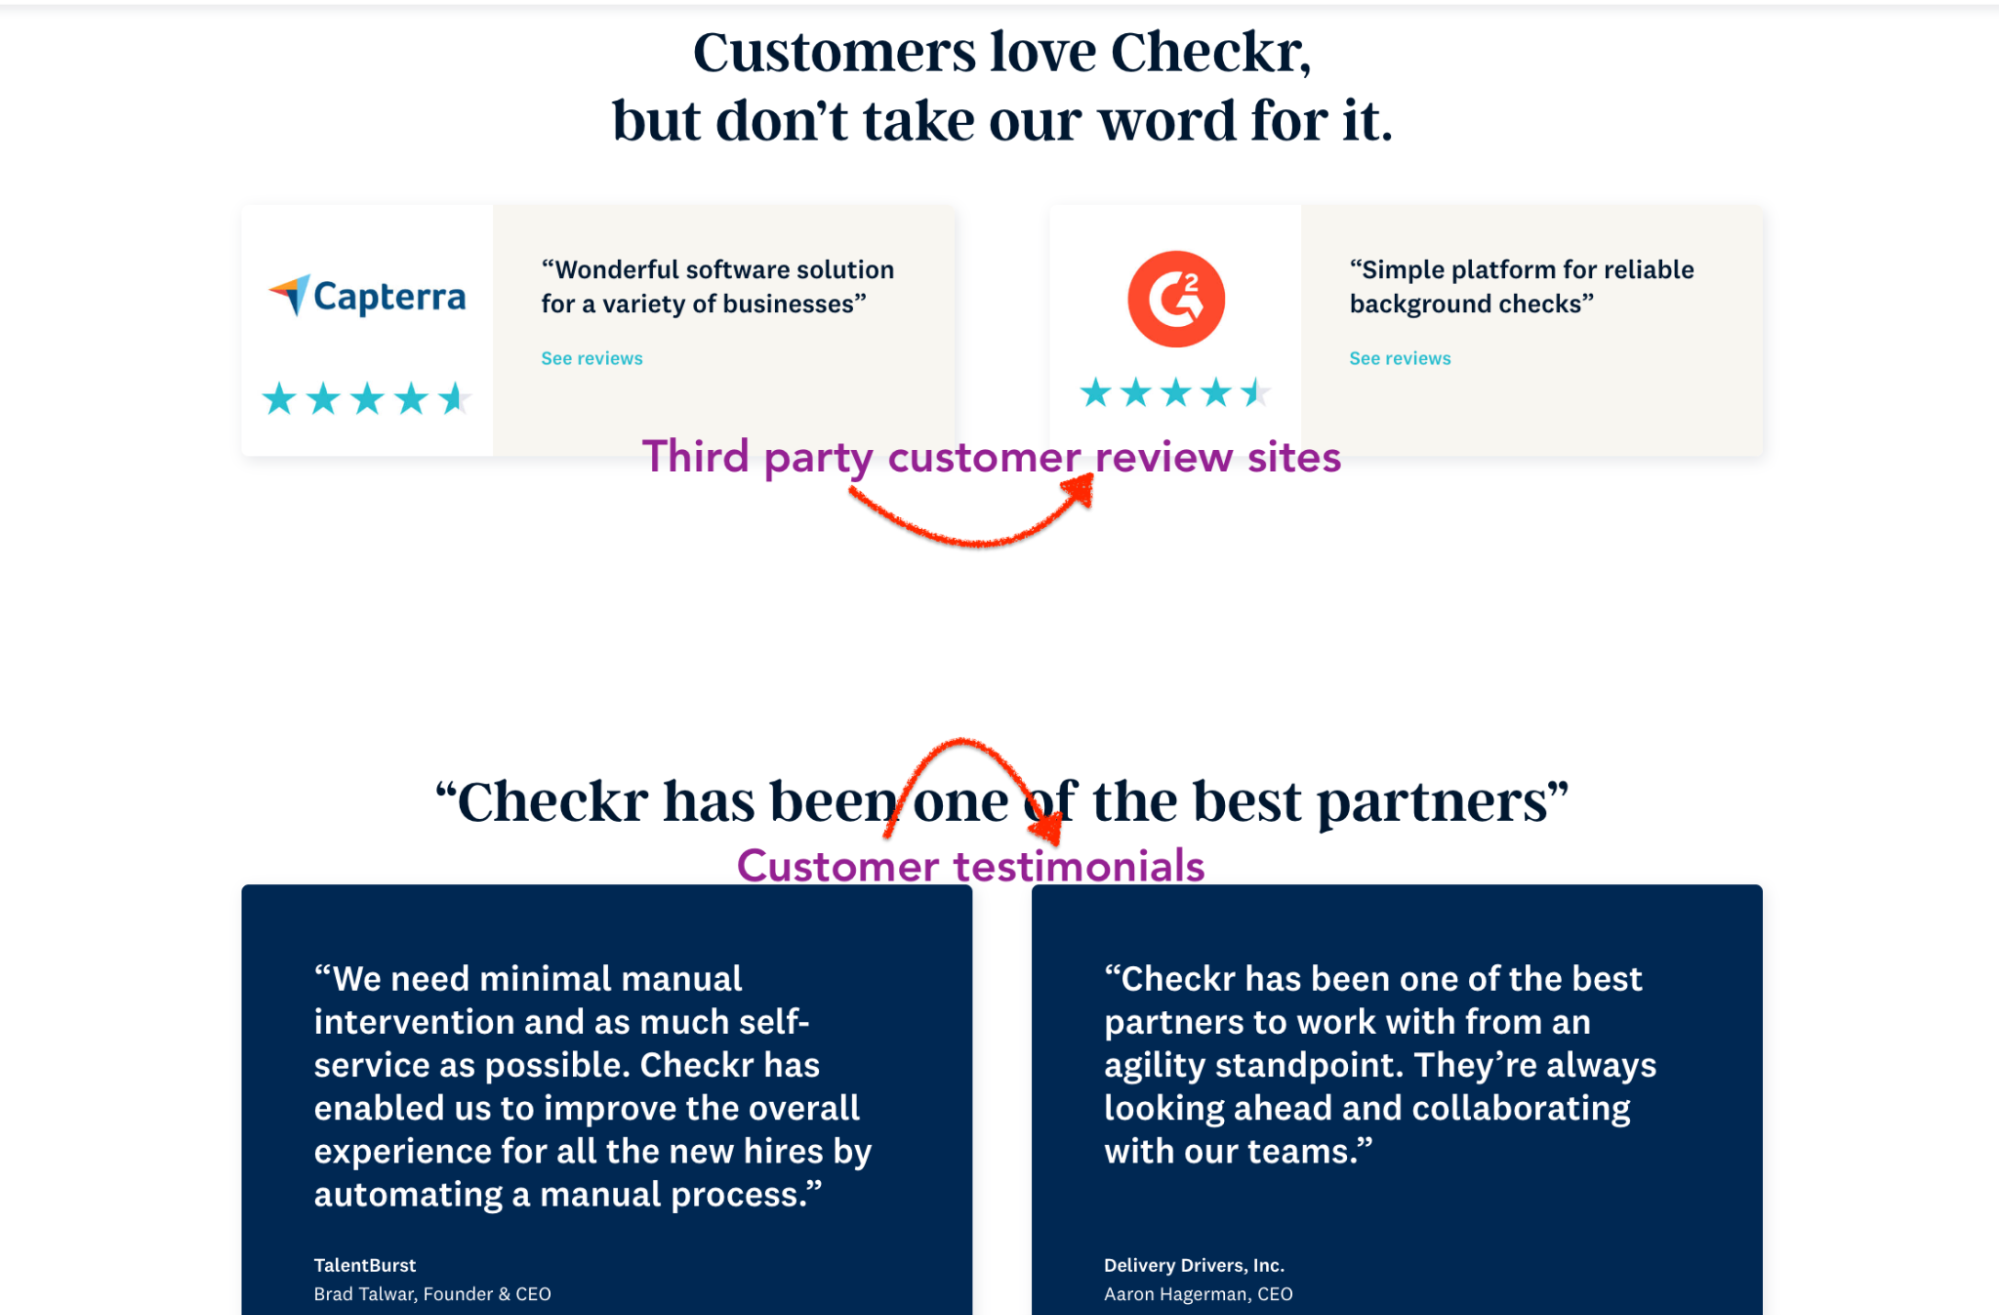 Checkr's background check page social proof